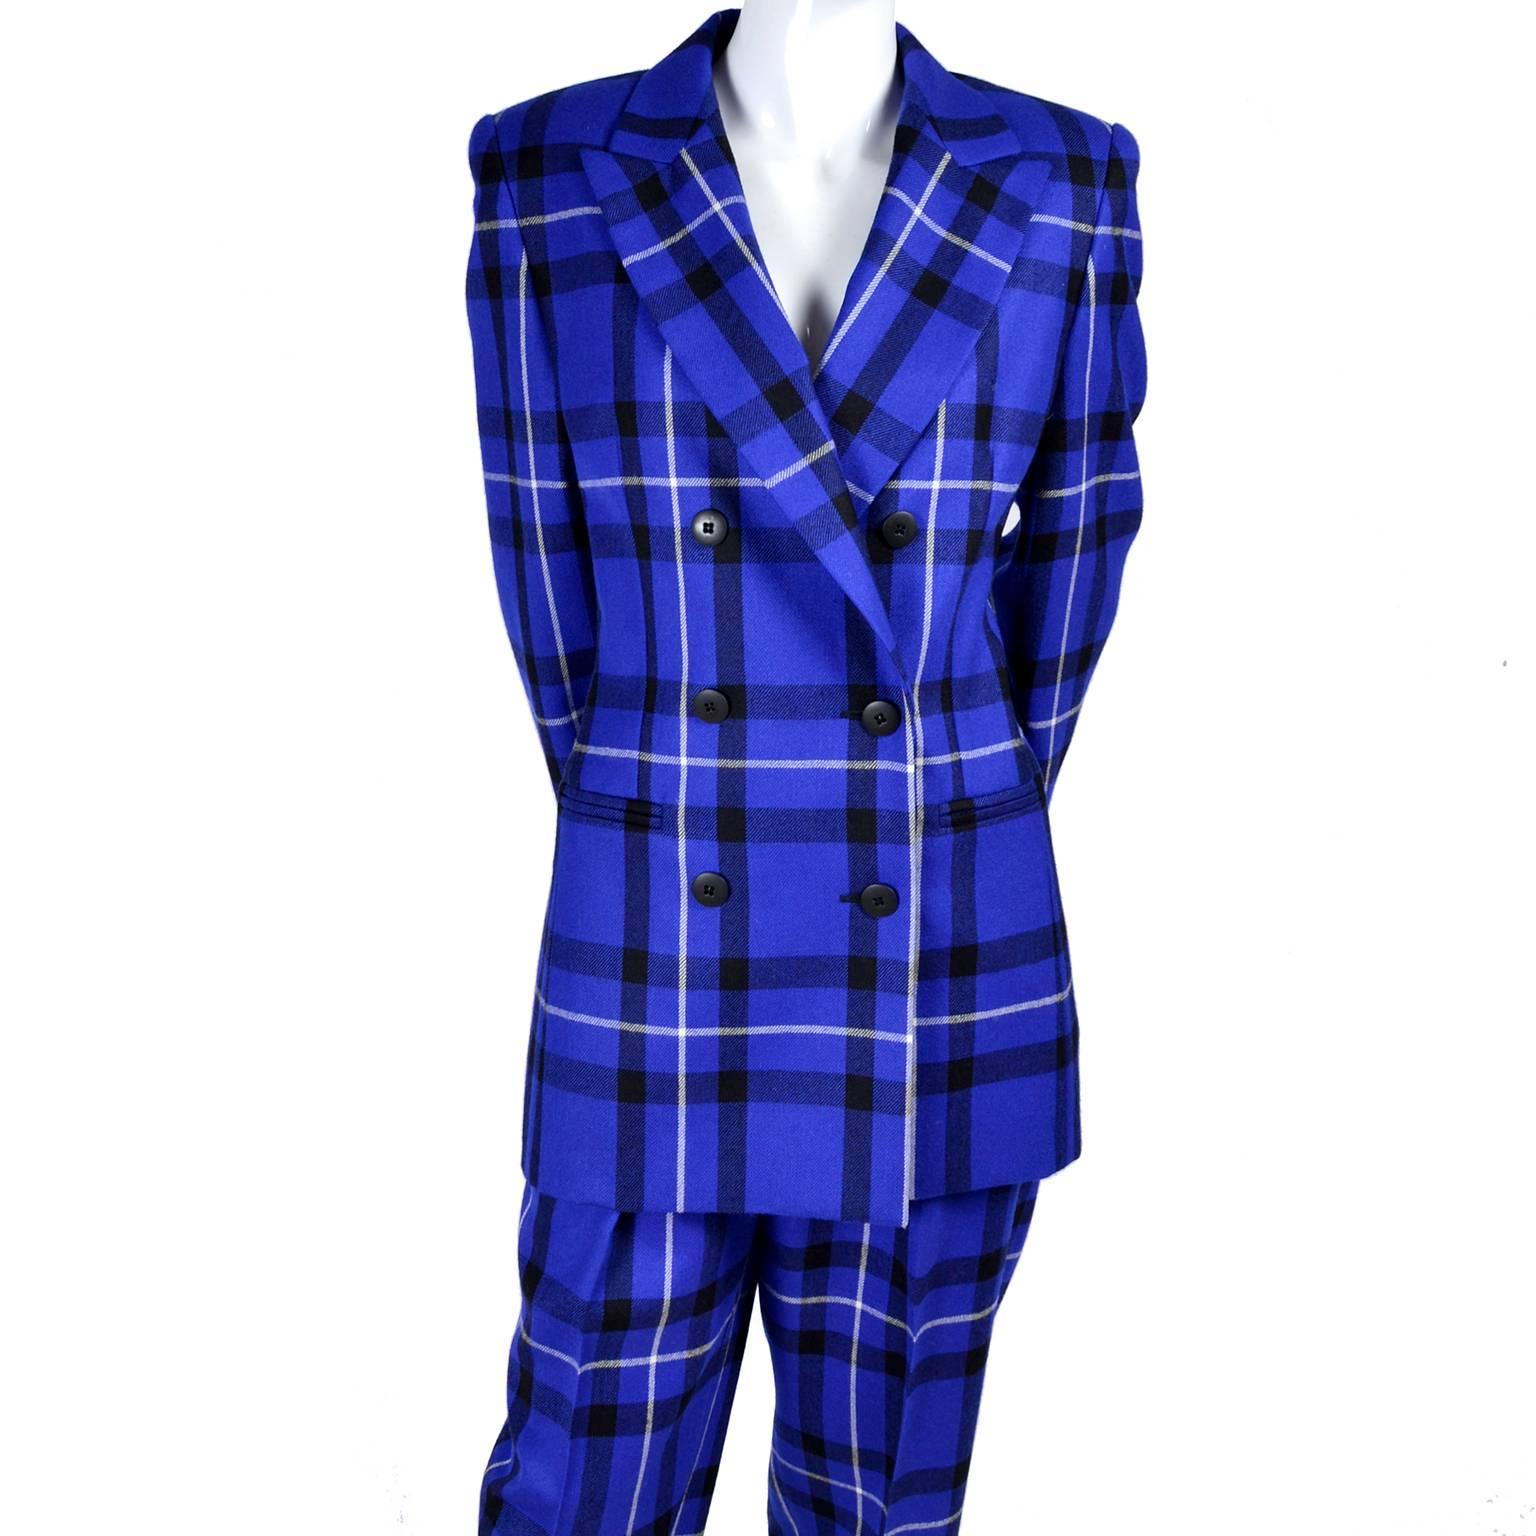 This vintage Escada pantsuit is perfectly on trend in a gorgeous blue plaid wool.  The suit was designed by Margaretha Ley and is 100% wool. The double breasted jacket is fully lined and has shoulder pads and front pockets.  The high waisted